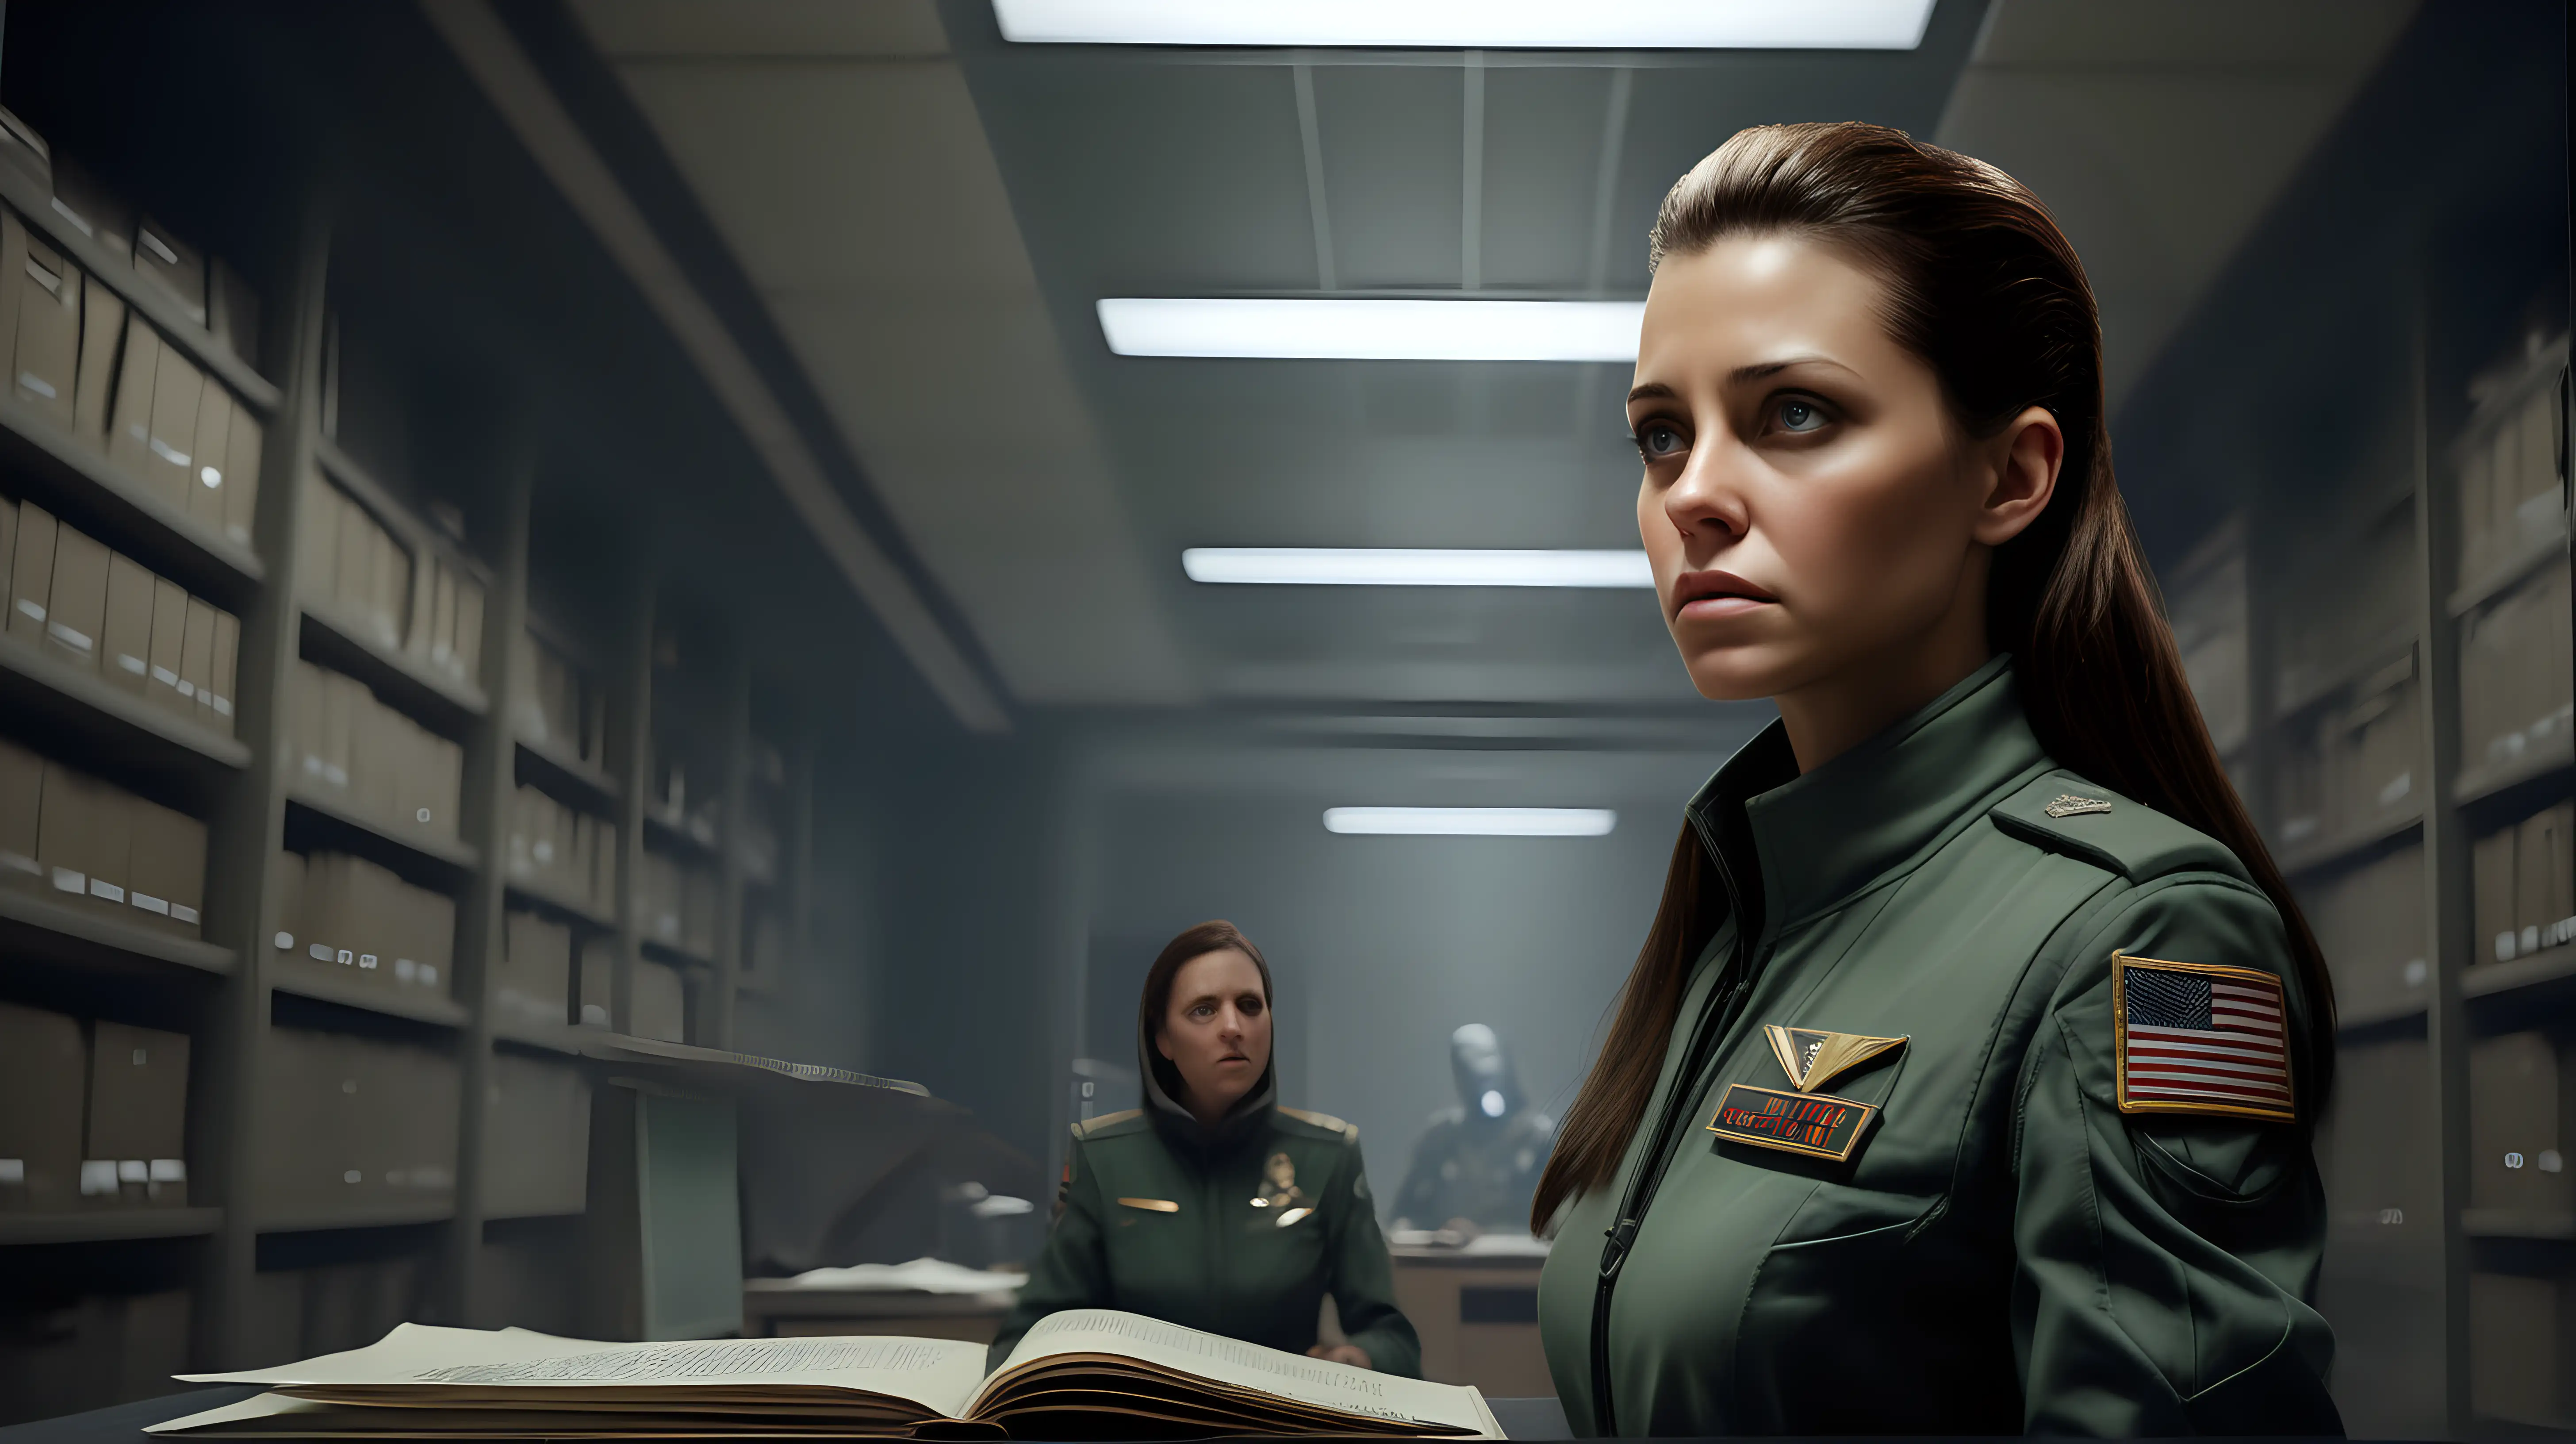 Create an image capturing Commander Alexis in the archives room, torn between duty and compassion, as they decide to help the aliens. Convey the internal struggle.